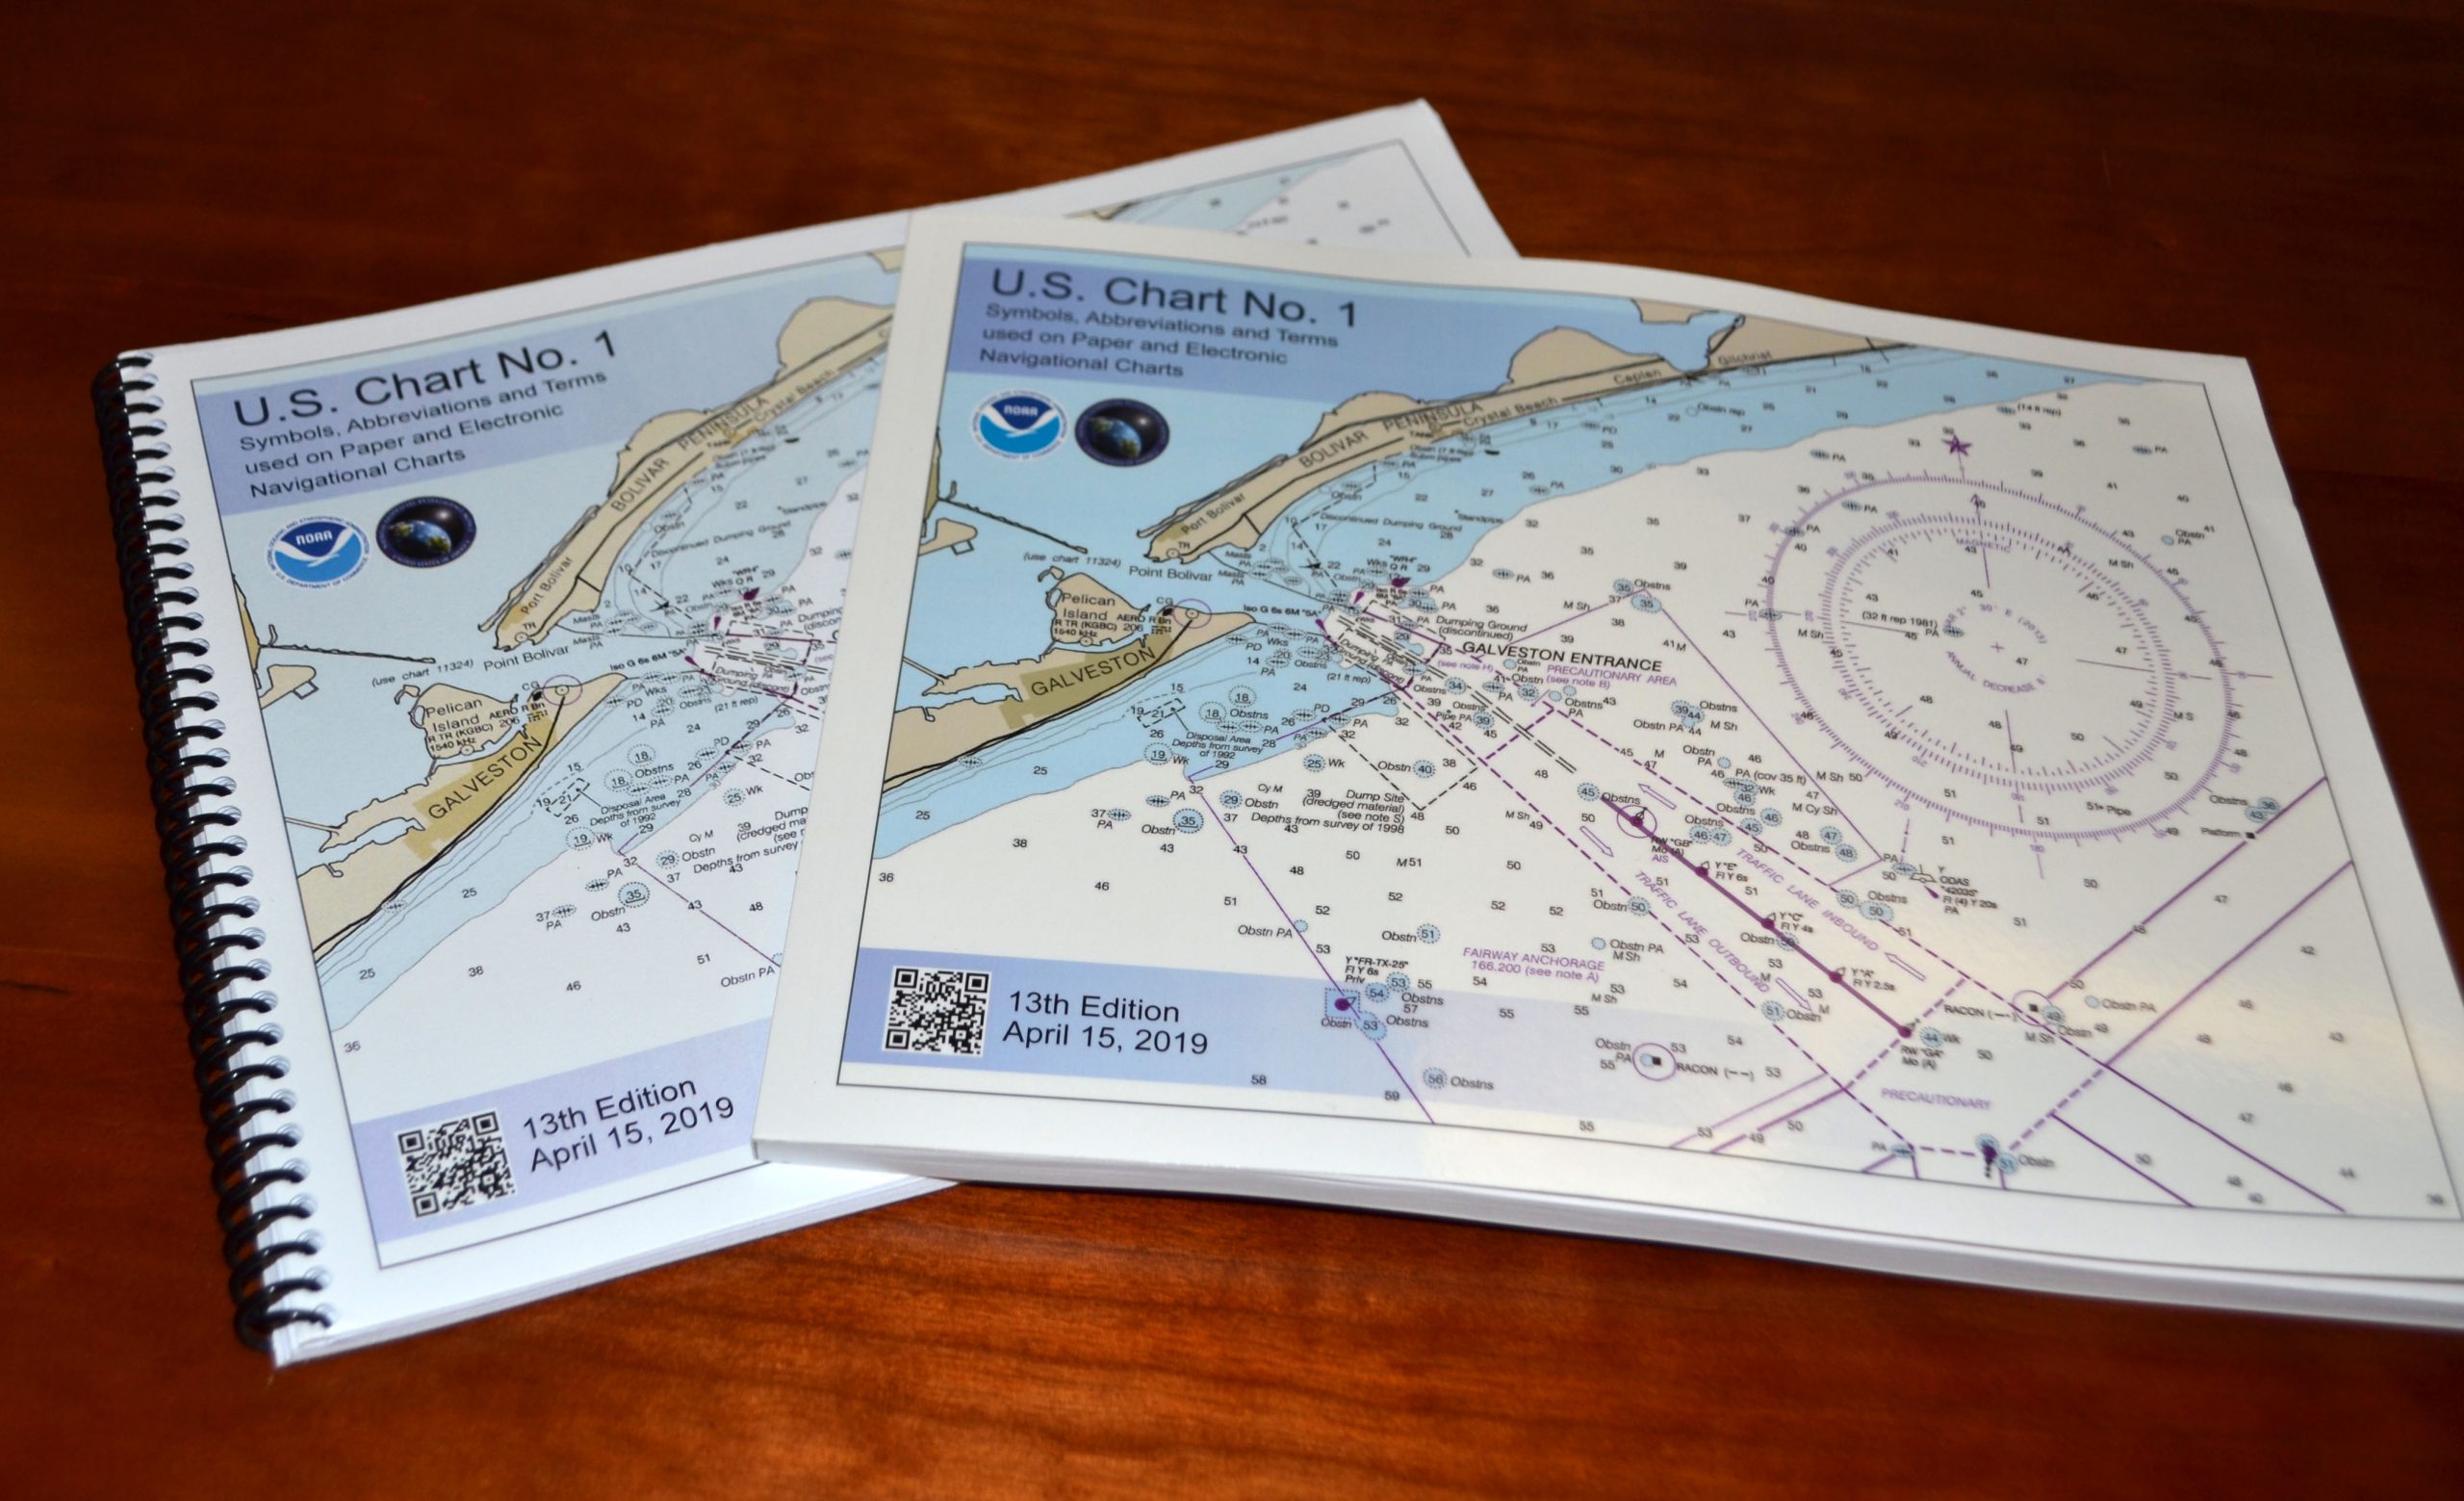 U.S. Chart No. 1 booklet covers